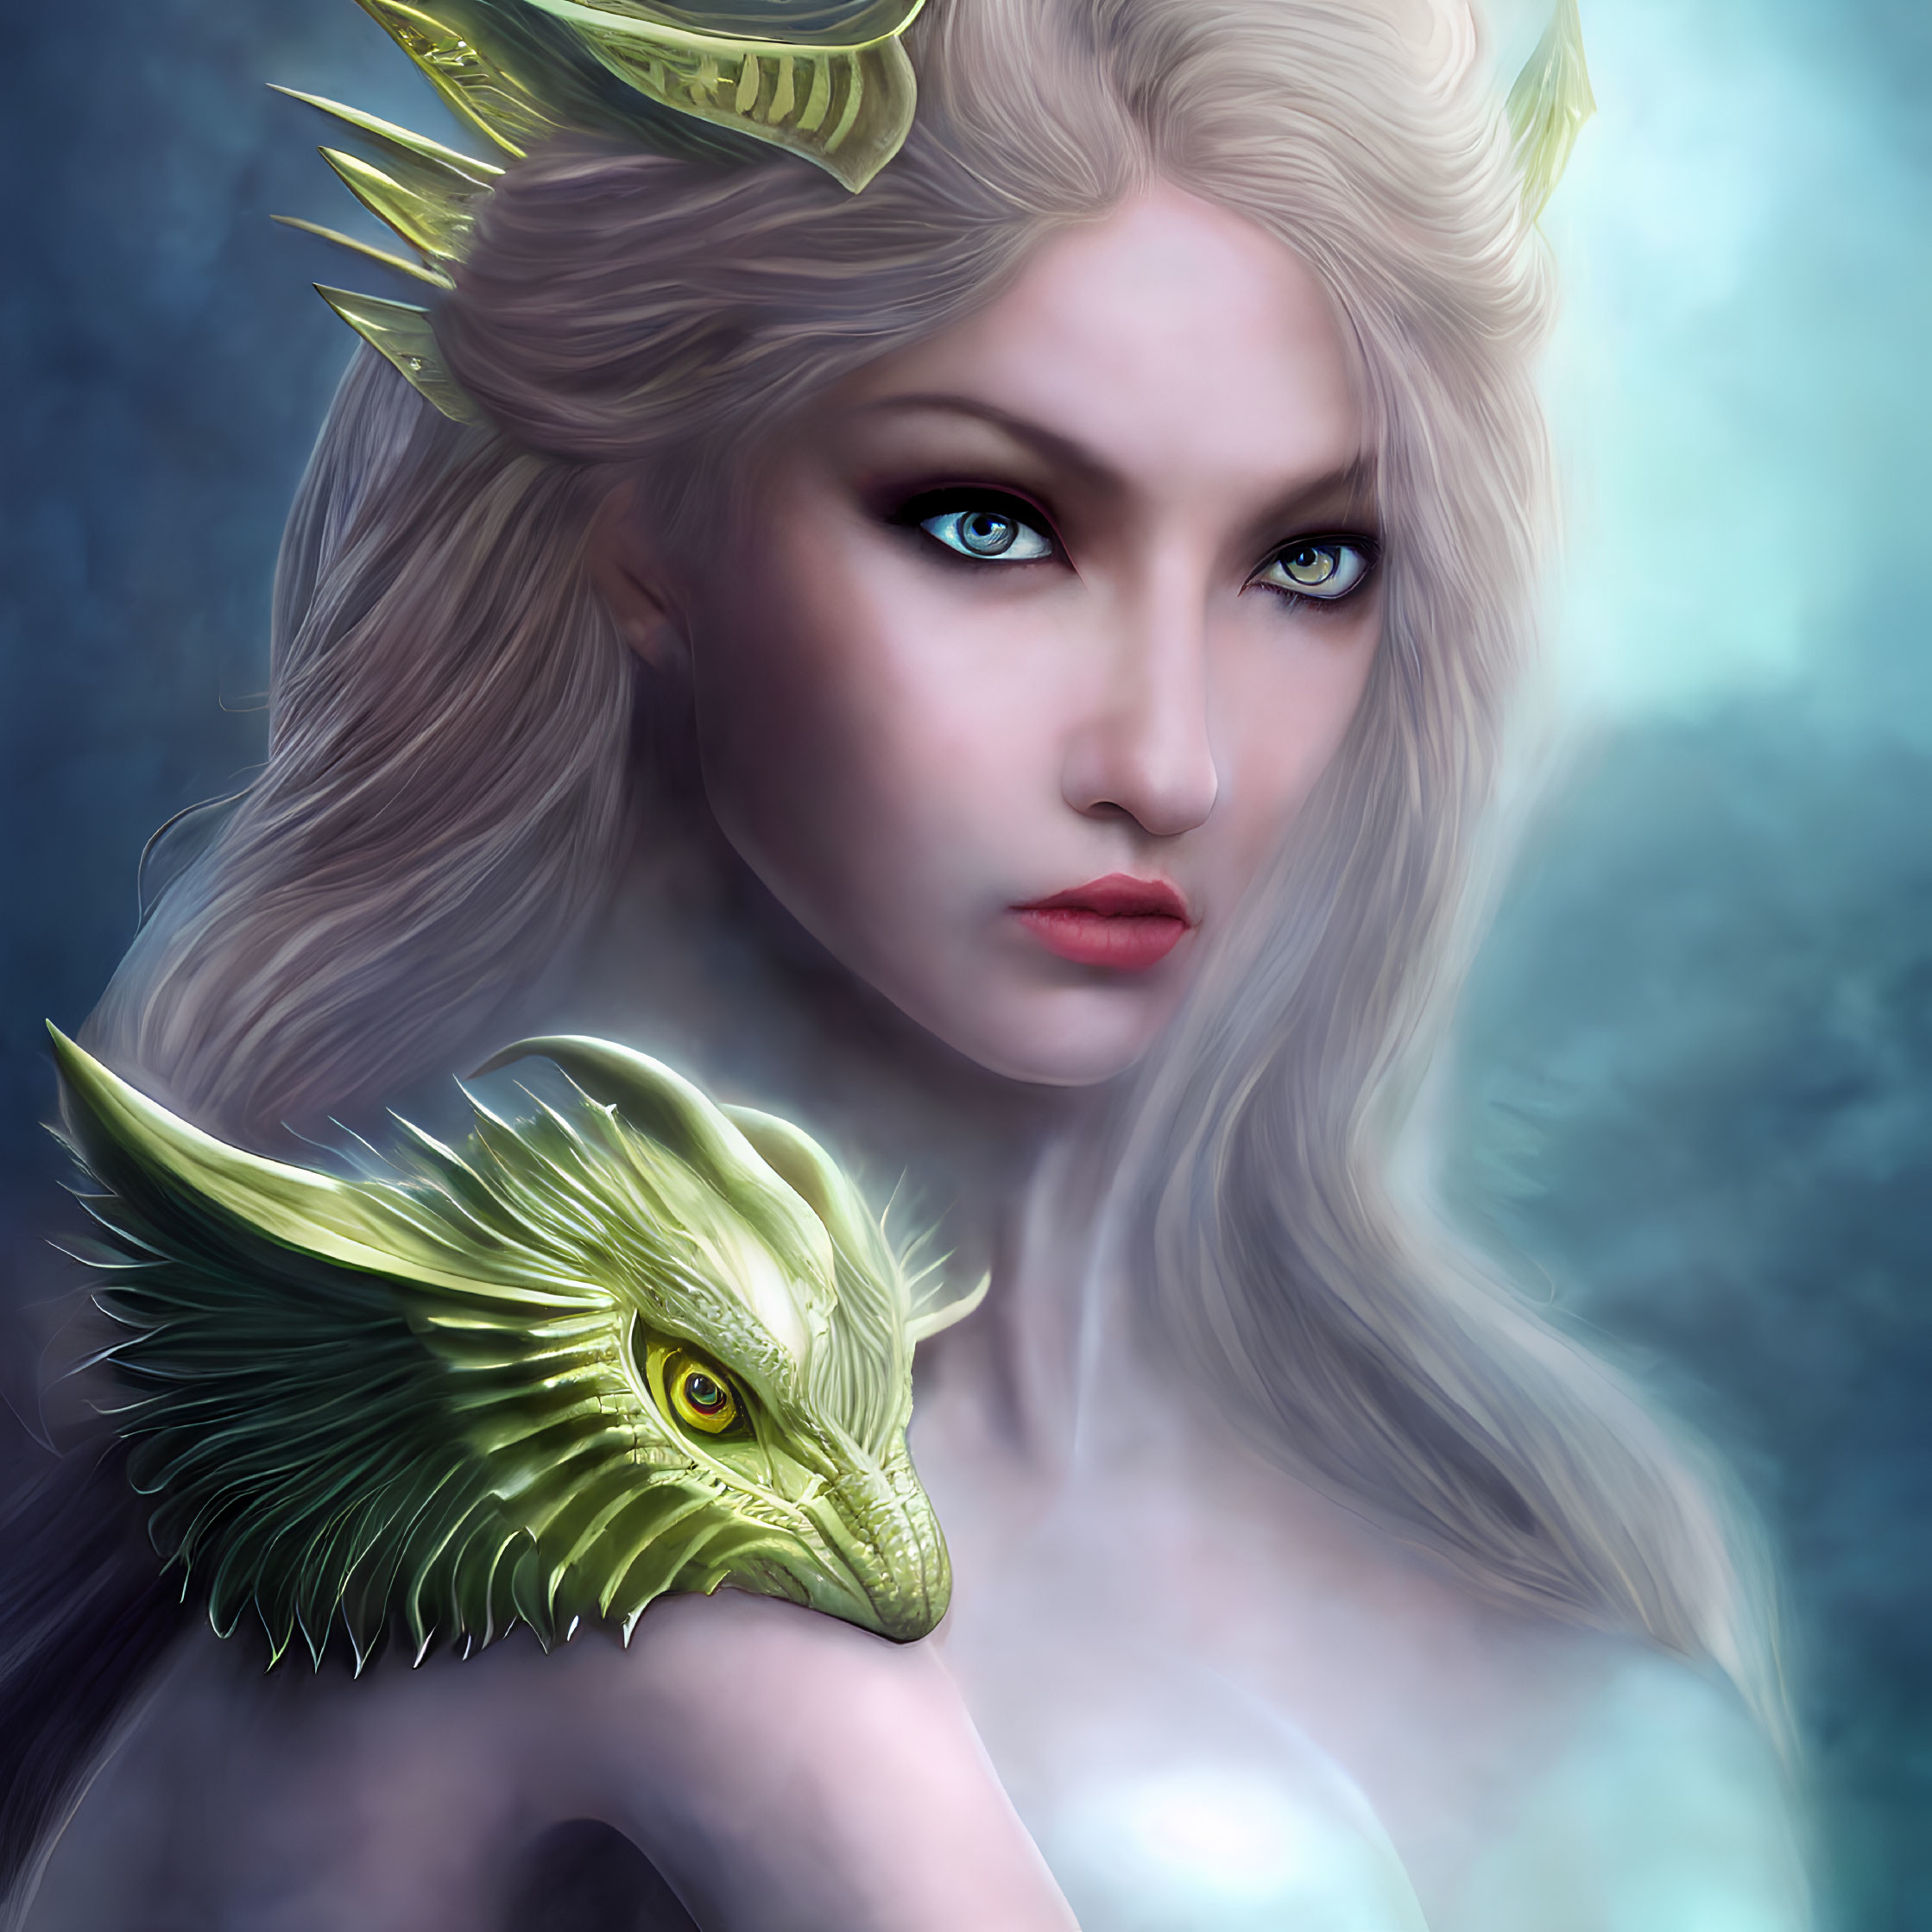 Fantasy illustration of woman with pale skin, icy blue eyes, white hair, golden dragon-like crown